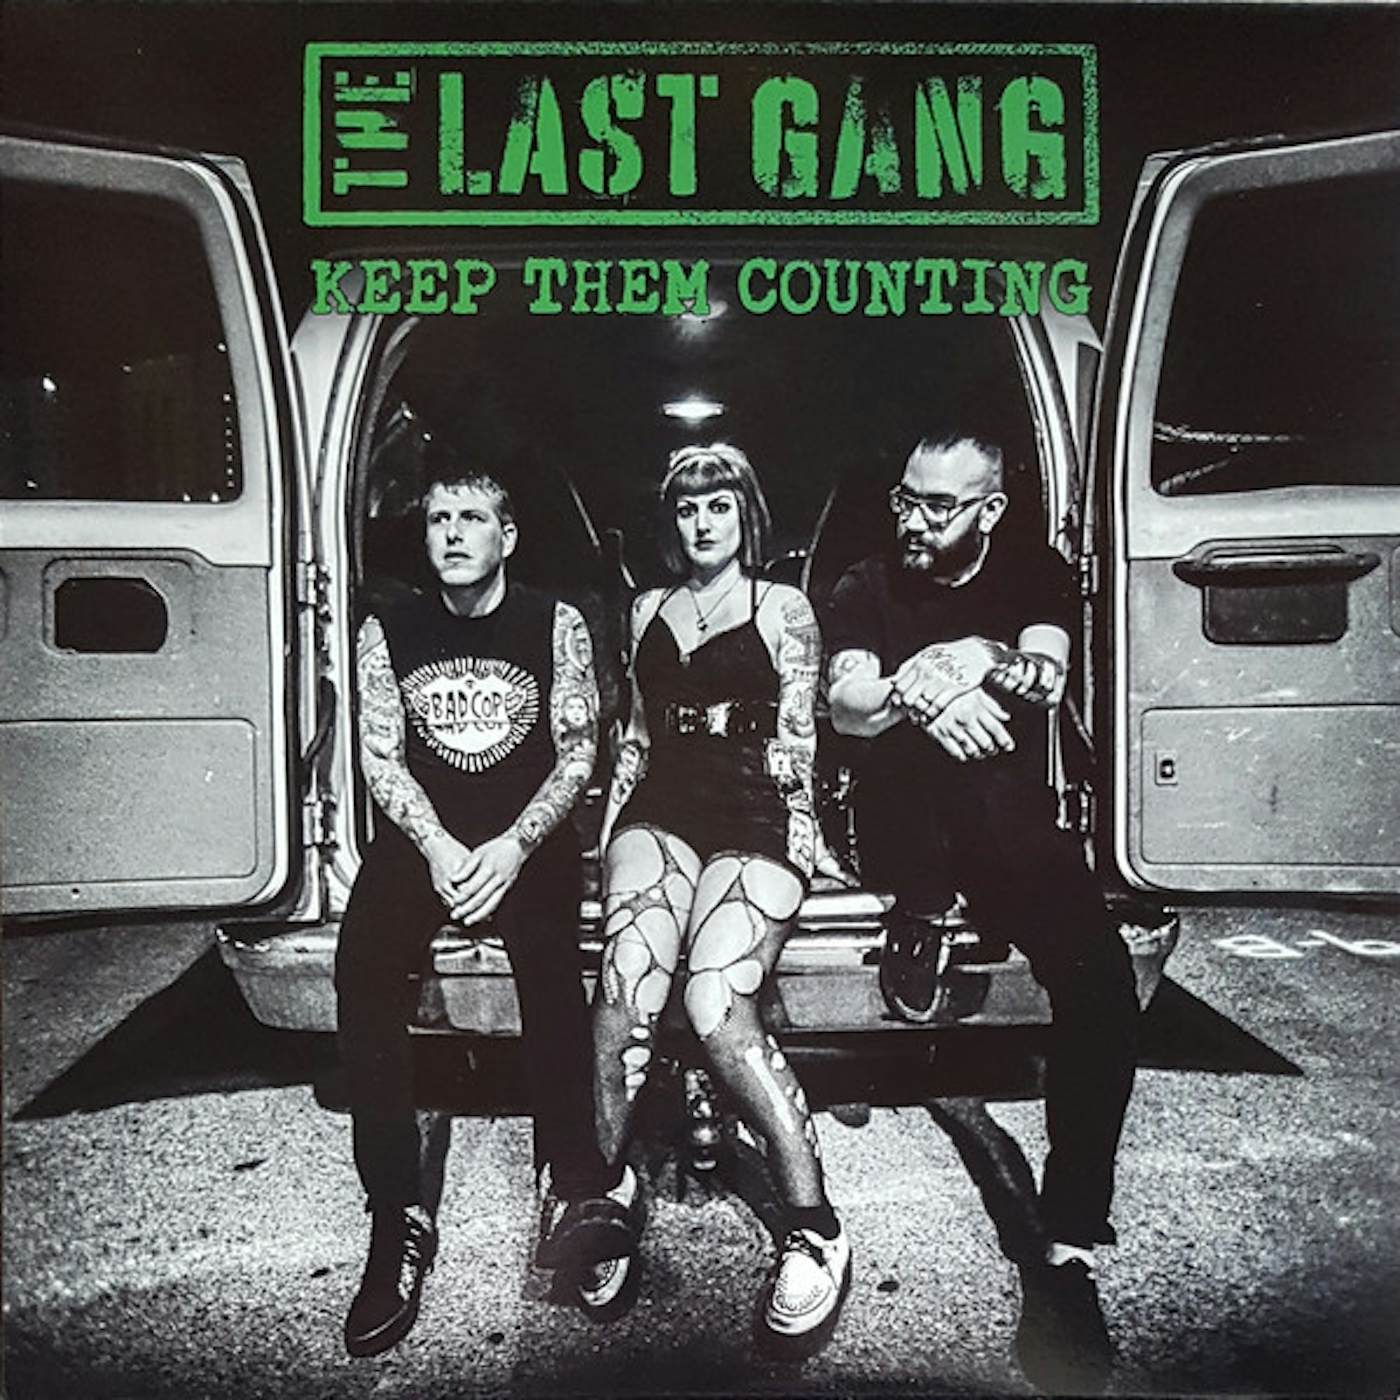 The Last Gang Keep Them Counting vinyl record